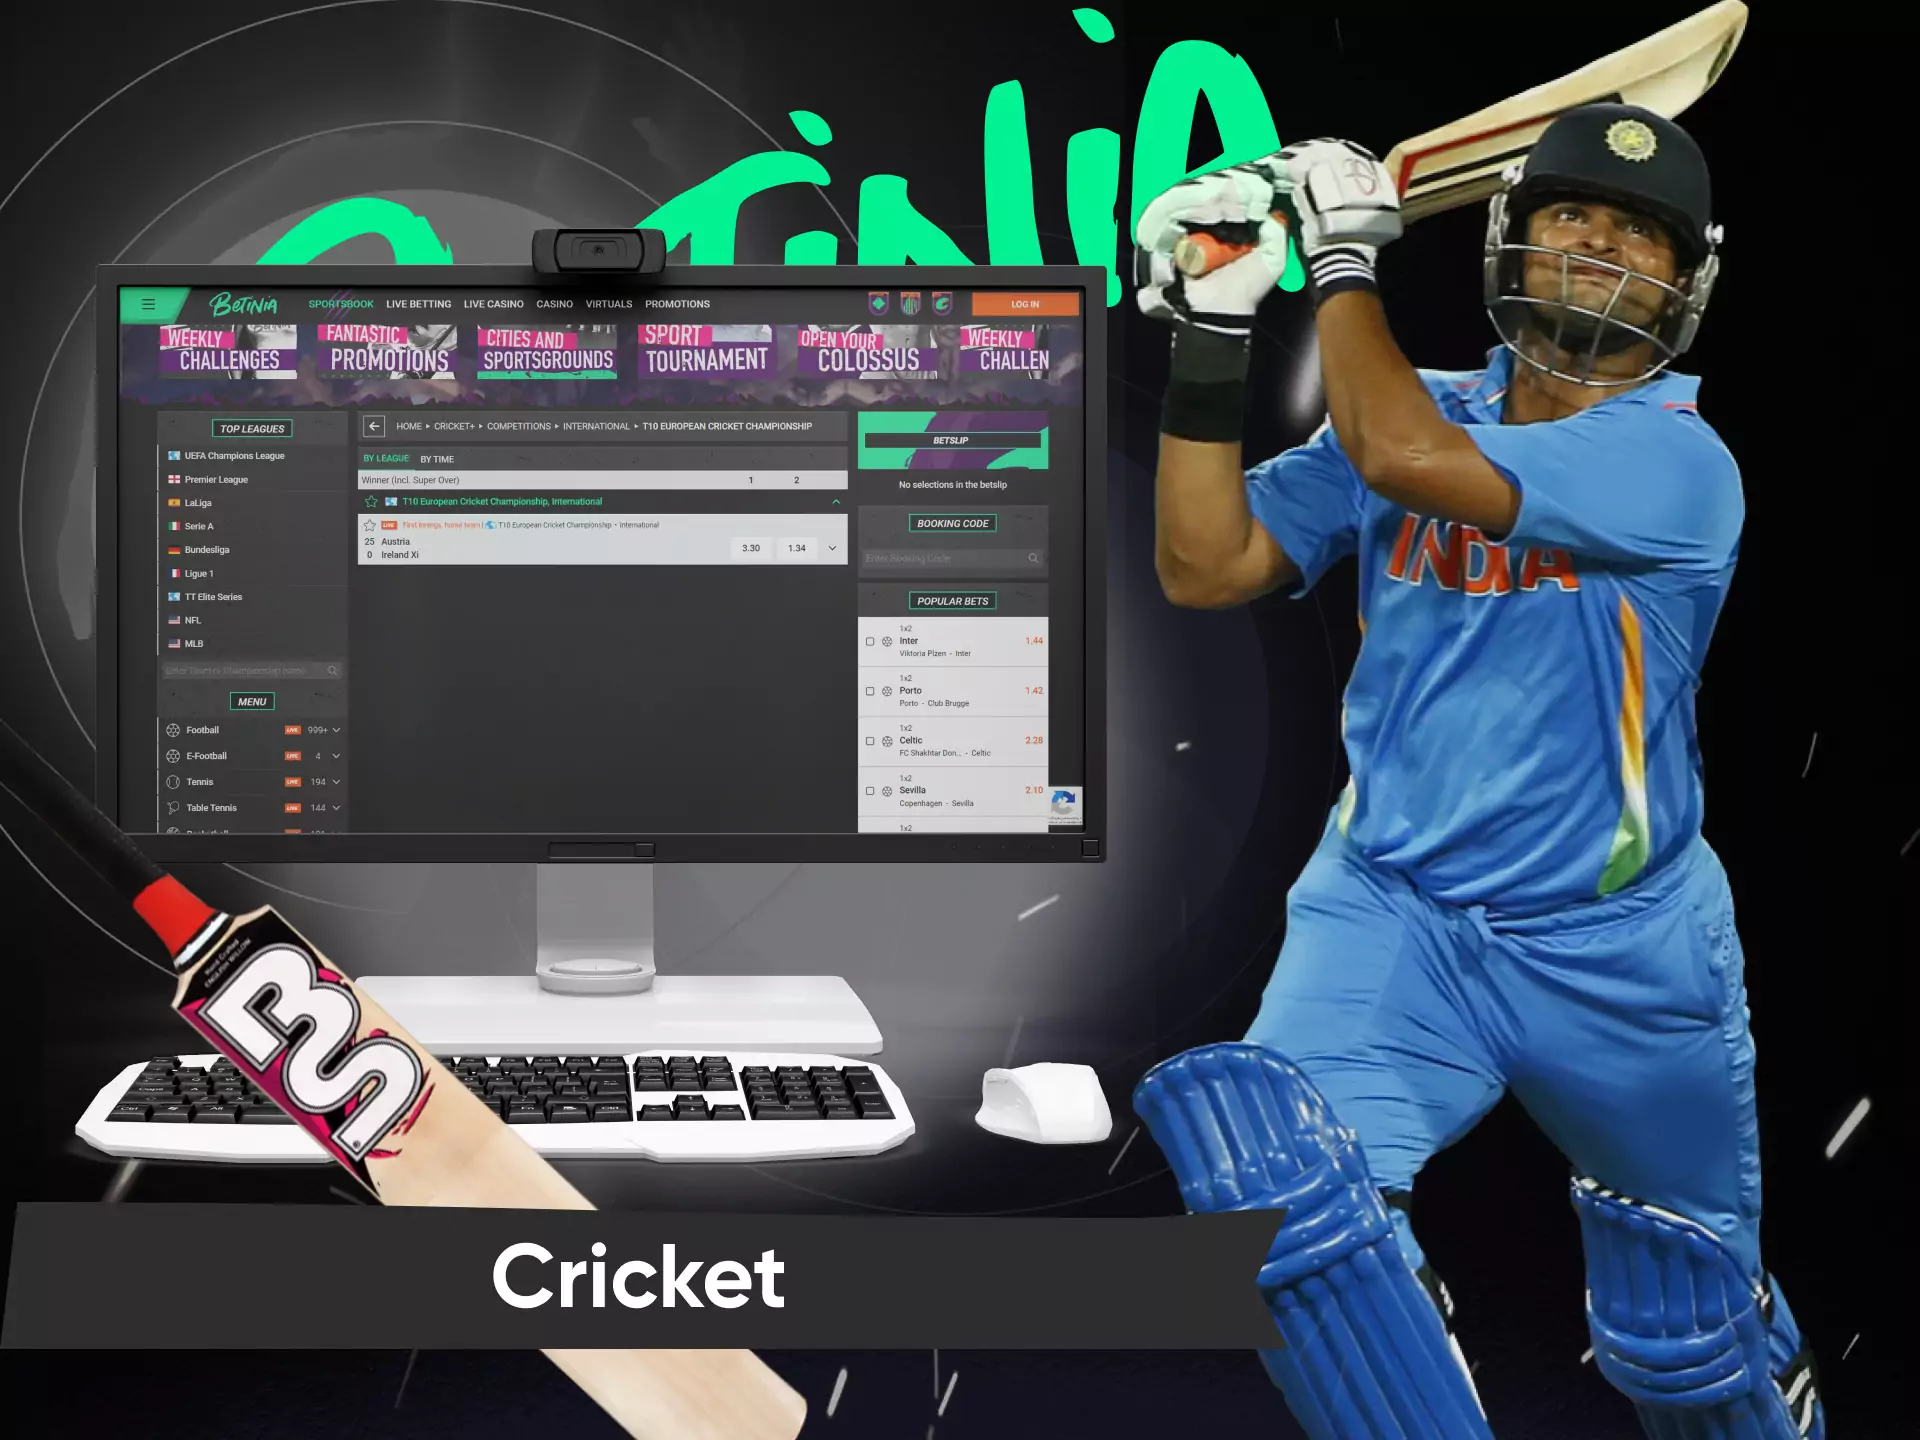 Cricket betting is extensively popular among Indian users of Betinia.